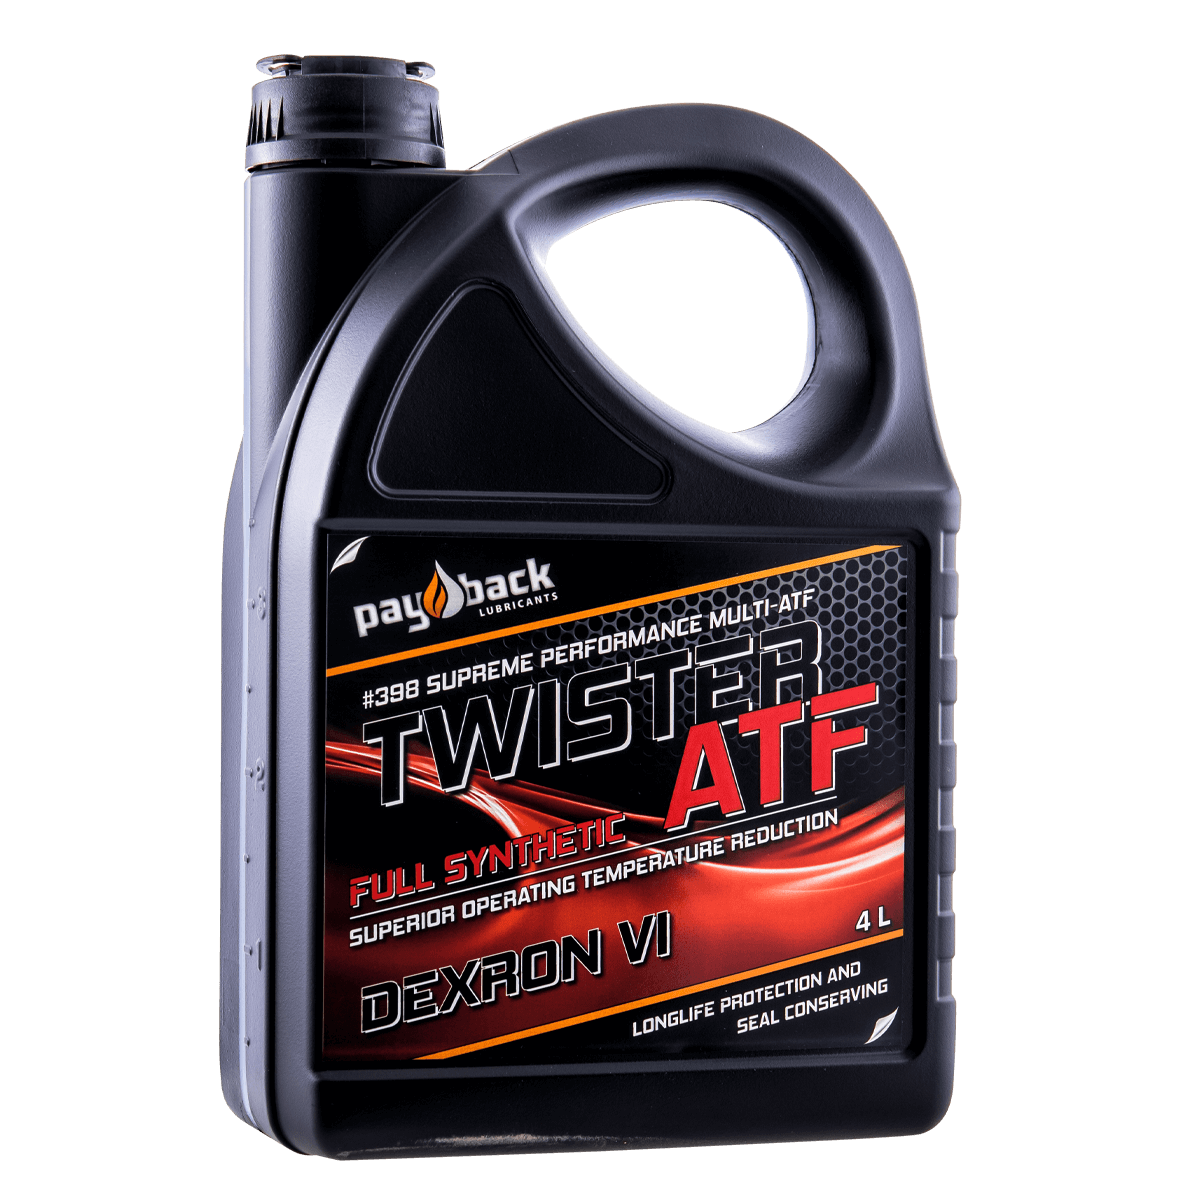  #398 A TWISTER DX 6 ATF MULTIFUNKTIONELL ATF 1L